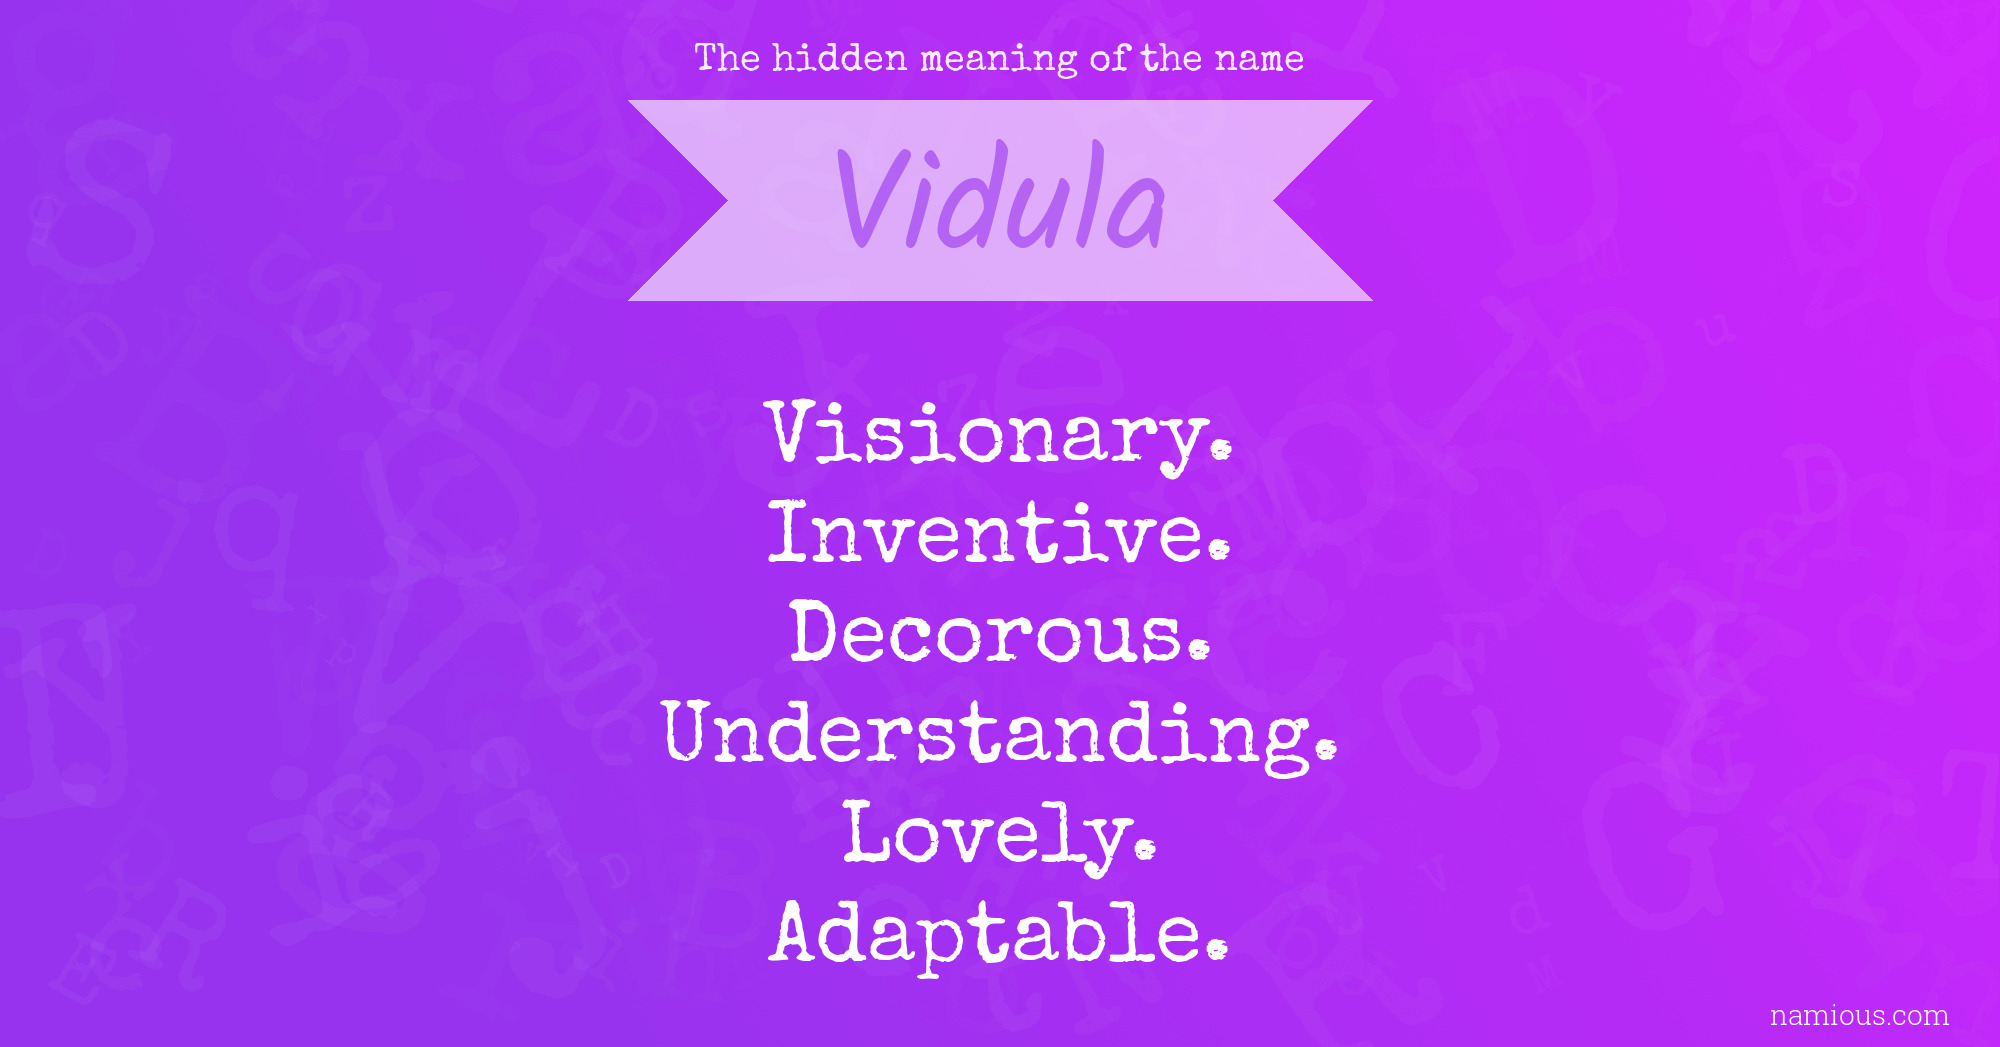 The hidden meaning of the name Vidula